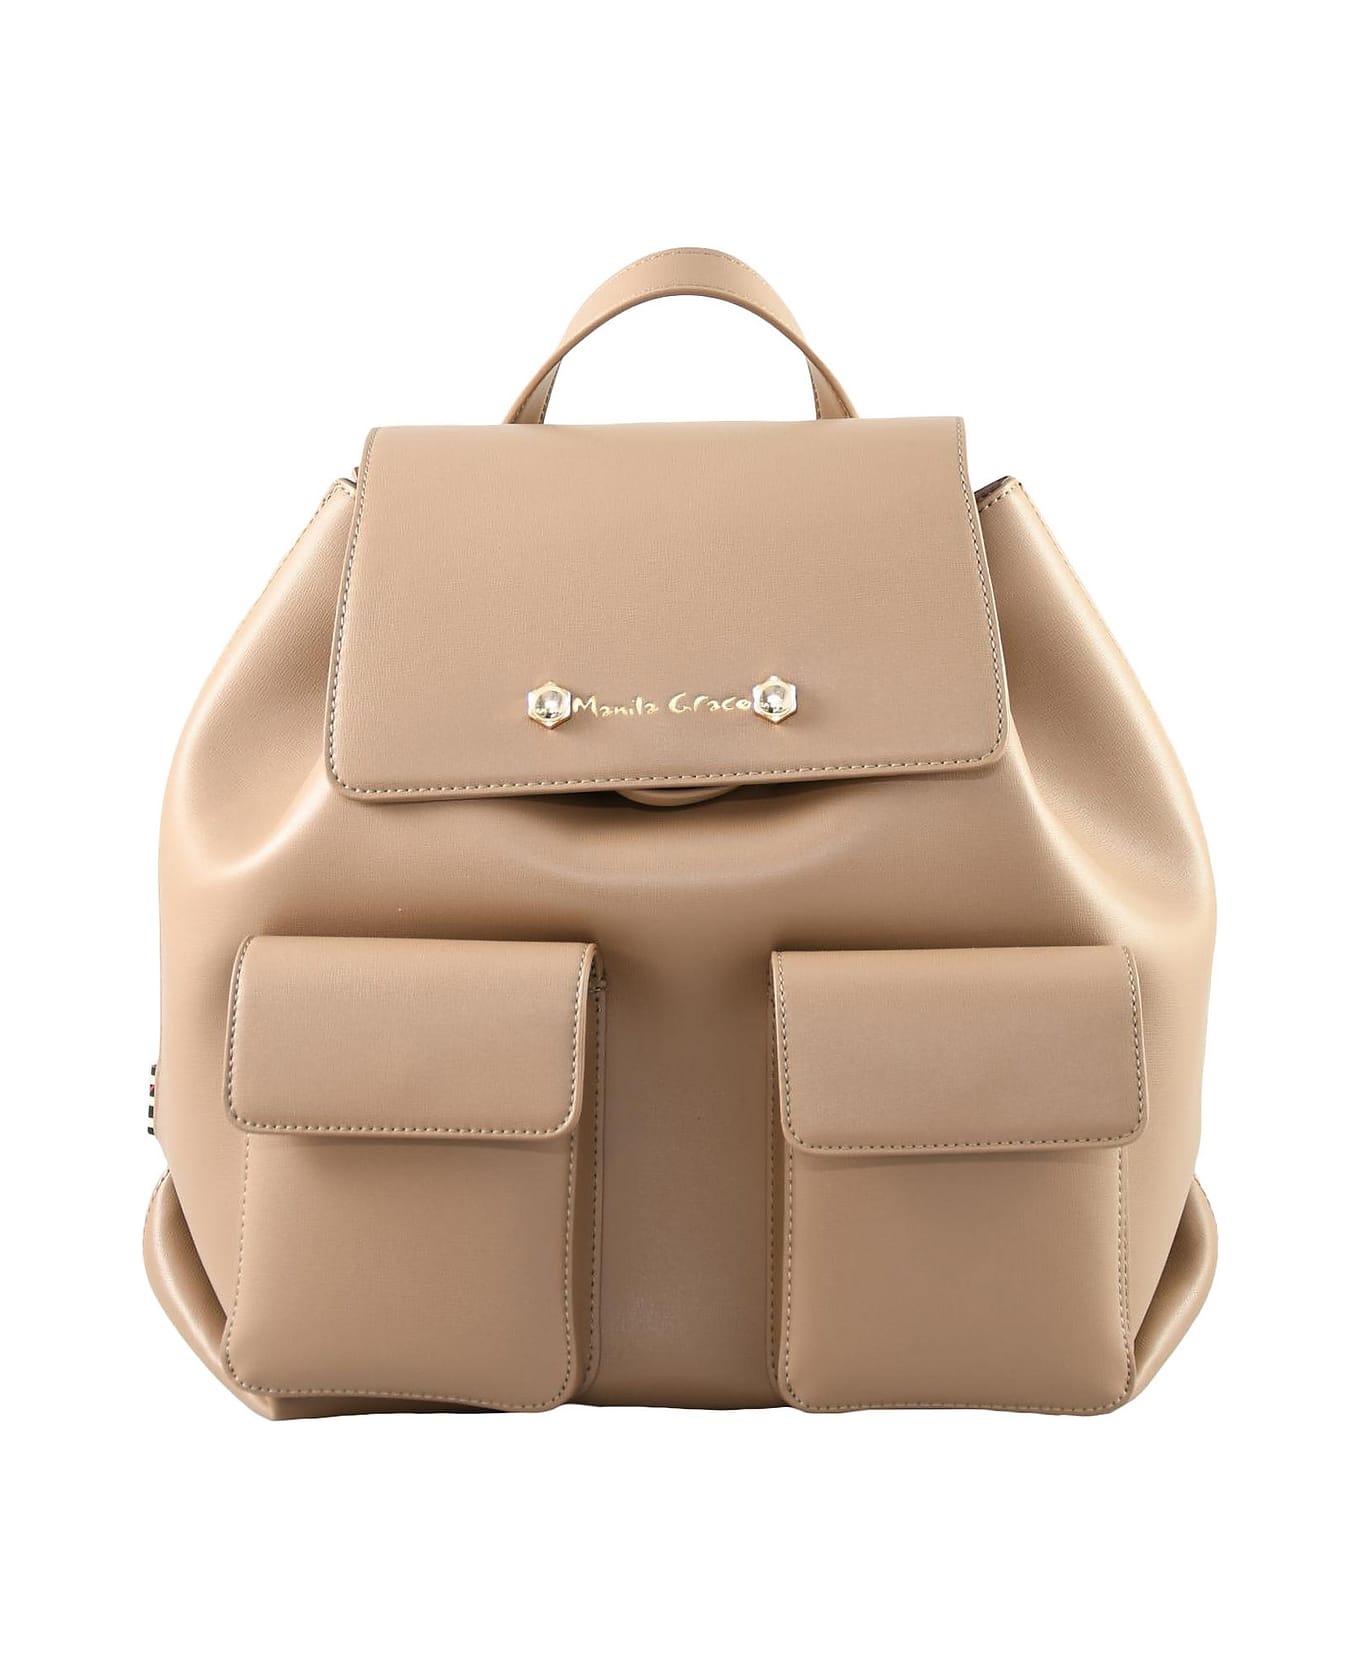 Manila Grace Women's Taupe Backpack - Taupe